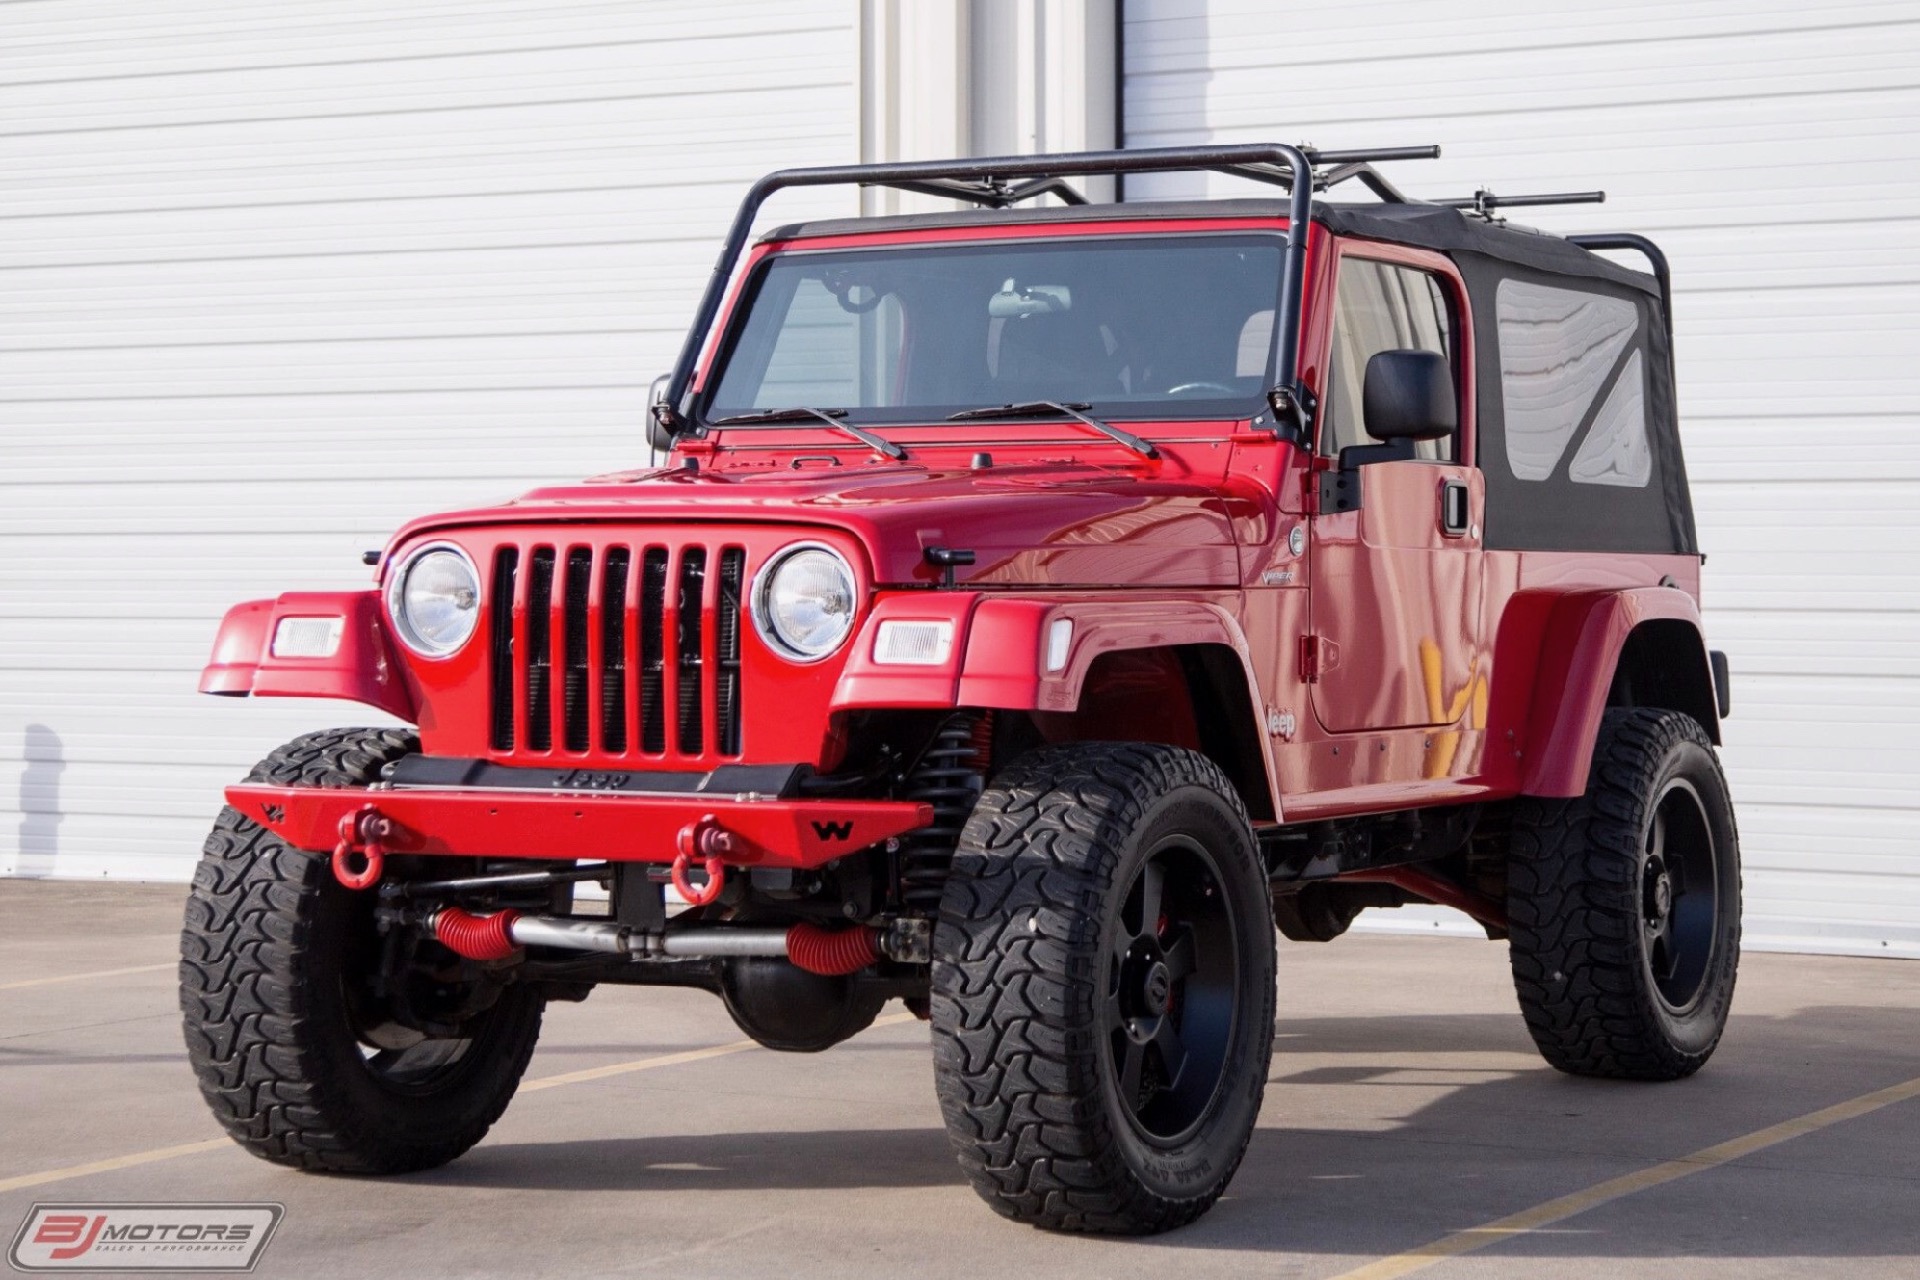 Viper V-10-powered 2005 Jeep Wrangler Unlimited for sale